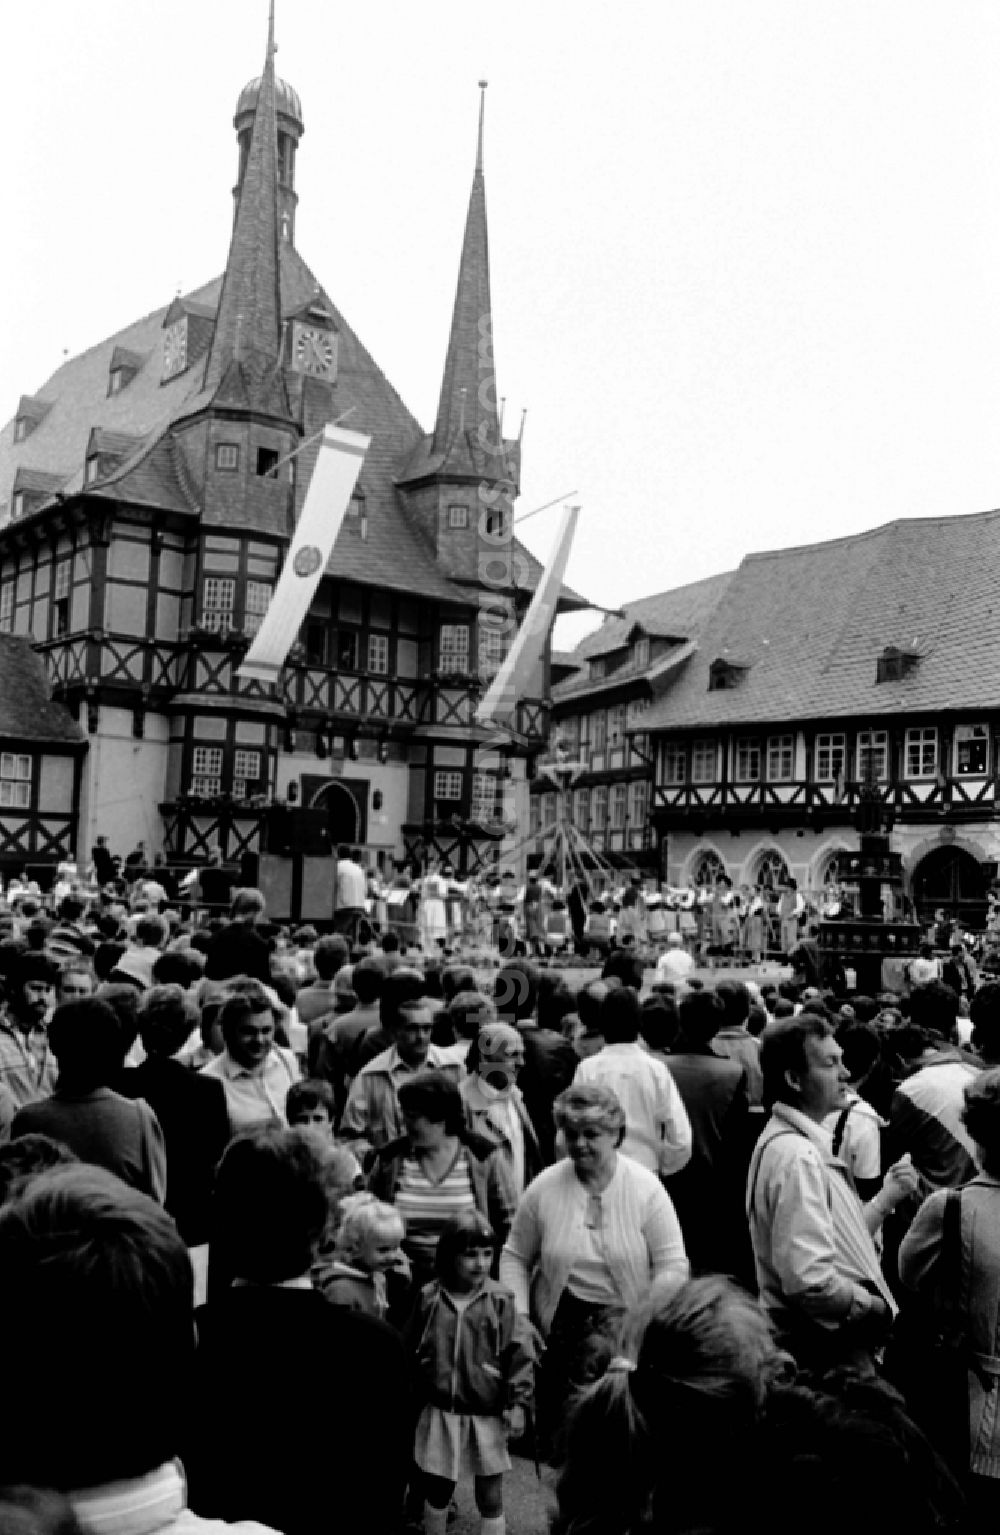 Wernigerode: Visitors at the 21st Workers' Festival in Wernigerode, Saxony-Anhalt in the territory of the former GDR, German Democratic Republic